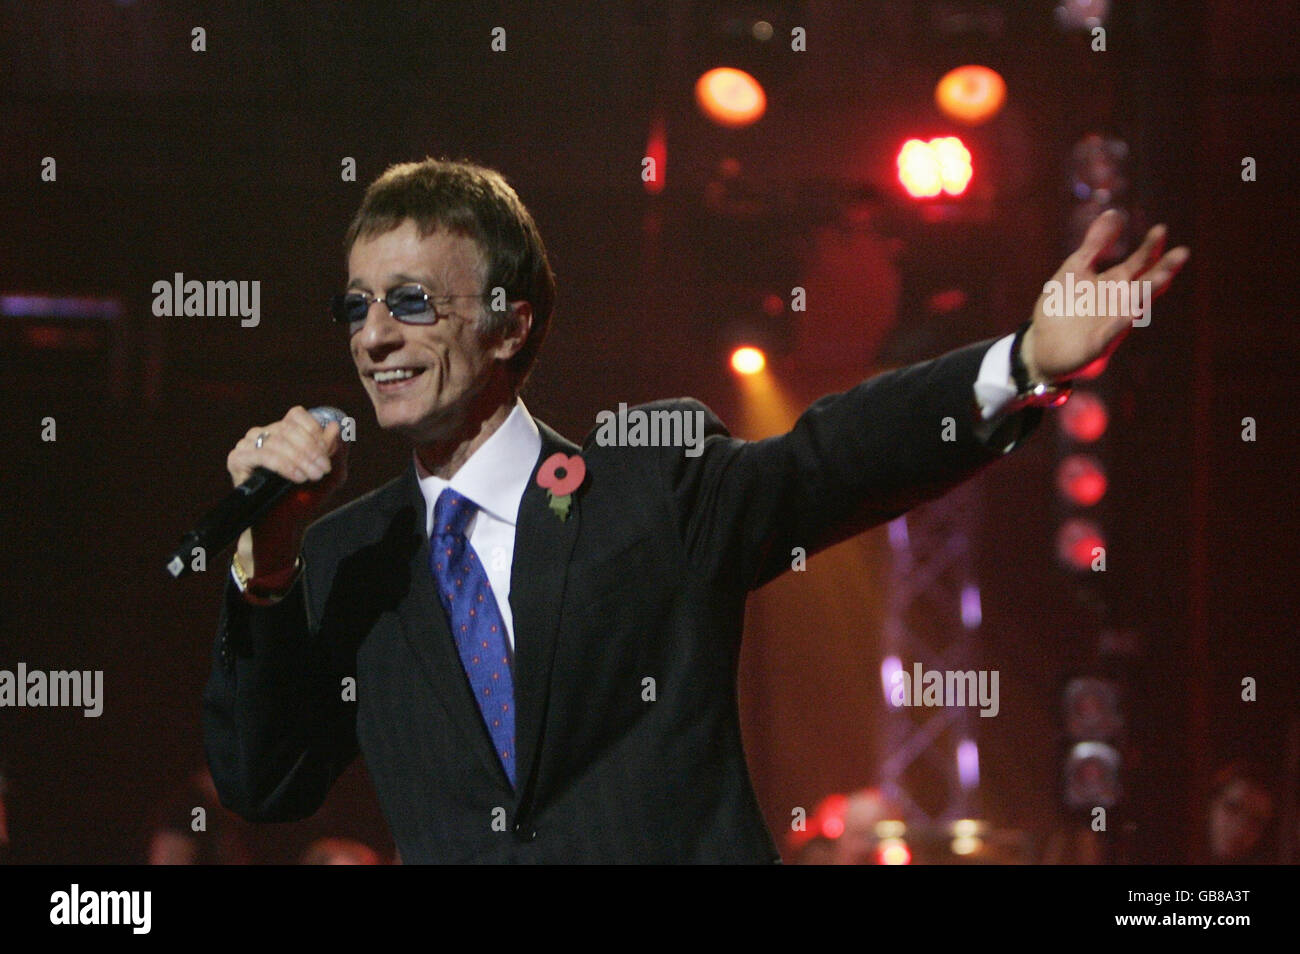 Robin Gibb performs at the BBC Electric Proms 2008 - Saturday Night Fever at the Roundhouse, Chalk Farm, London. Stock Photo